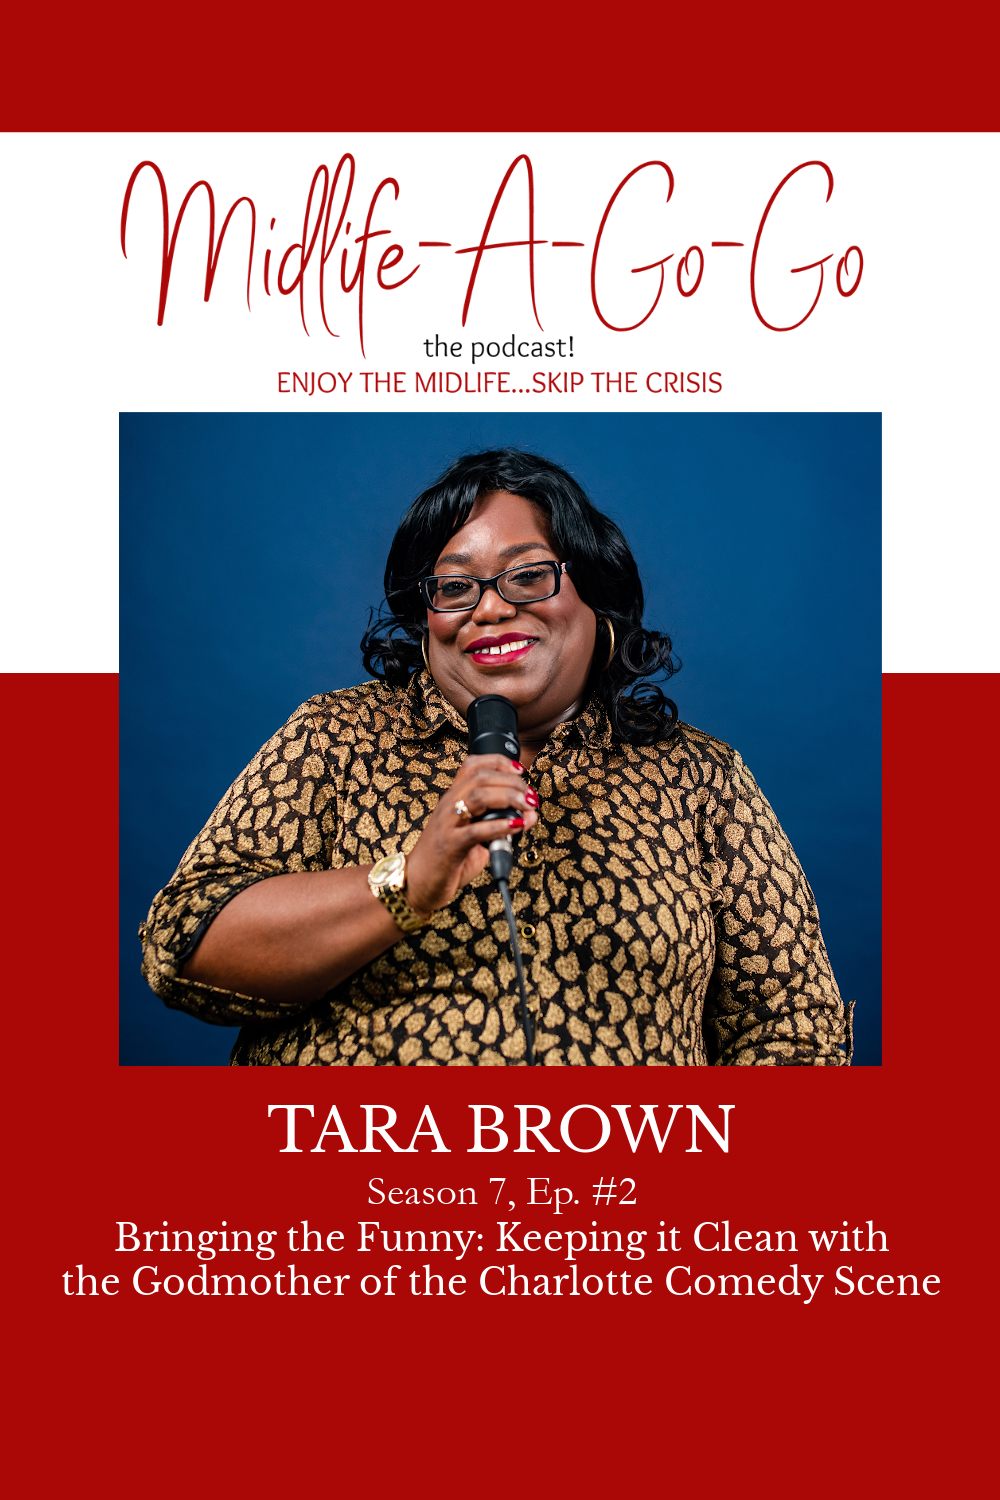 Bringing the Funny: Keeping it Clean with the Godmother of the Charlotte Comedy Scene w/Tara Brown